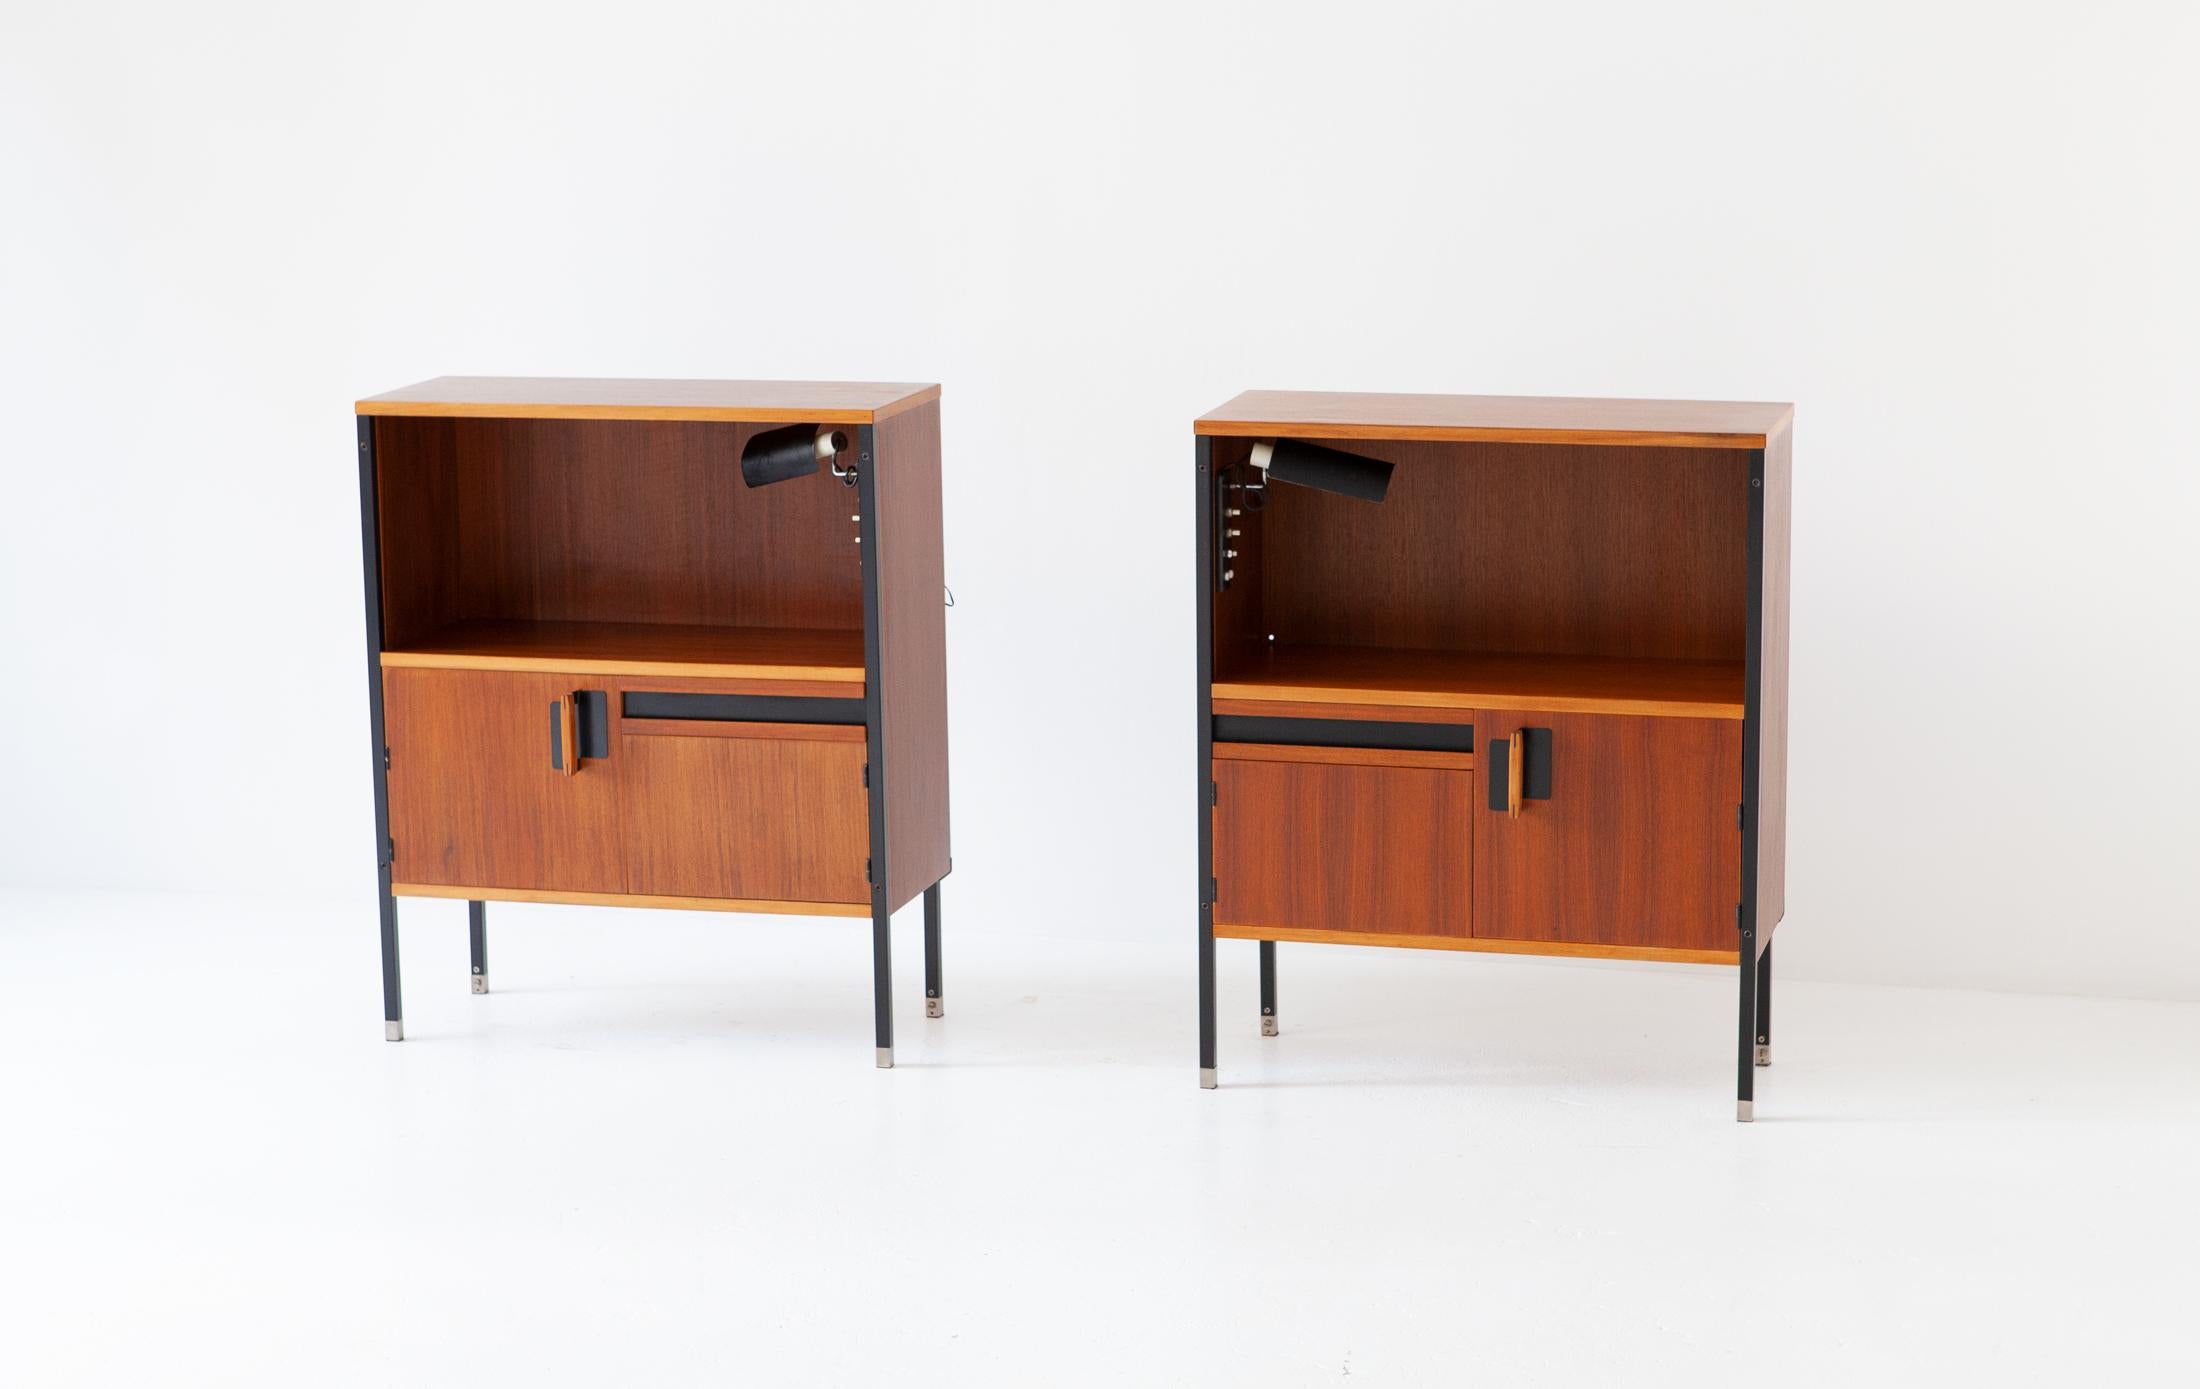 Metal Pair of Nightstands by Ico Parisi for MIM with Gino Sarfatti Lamps, 1958